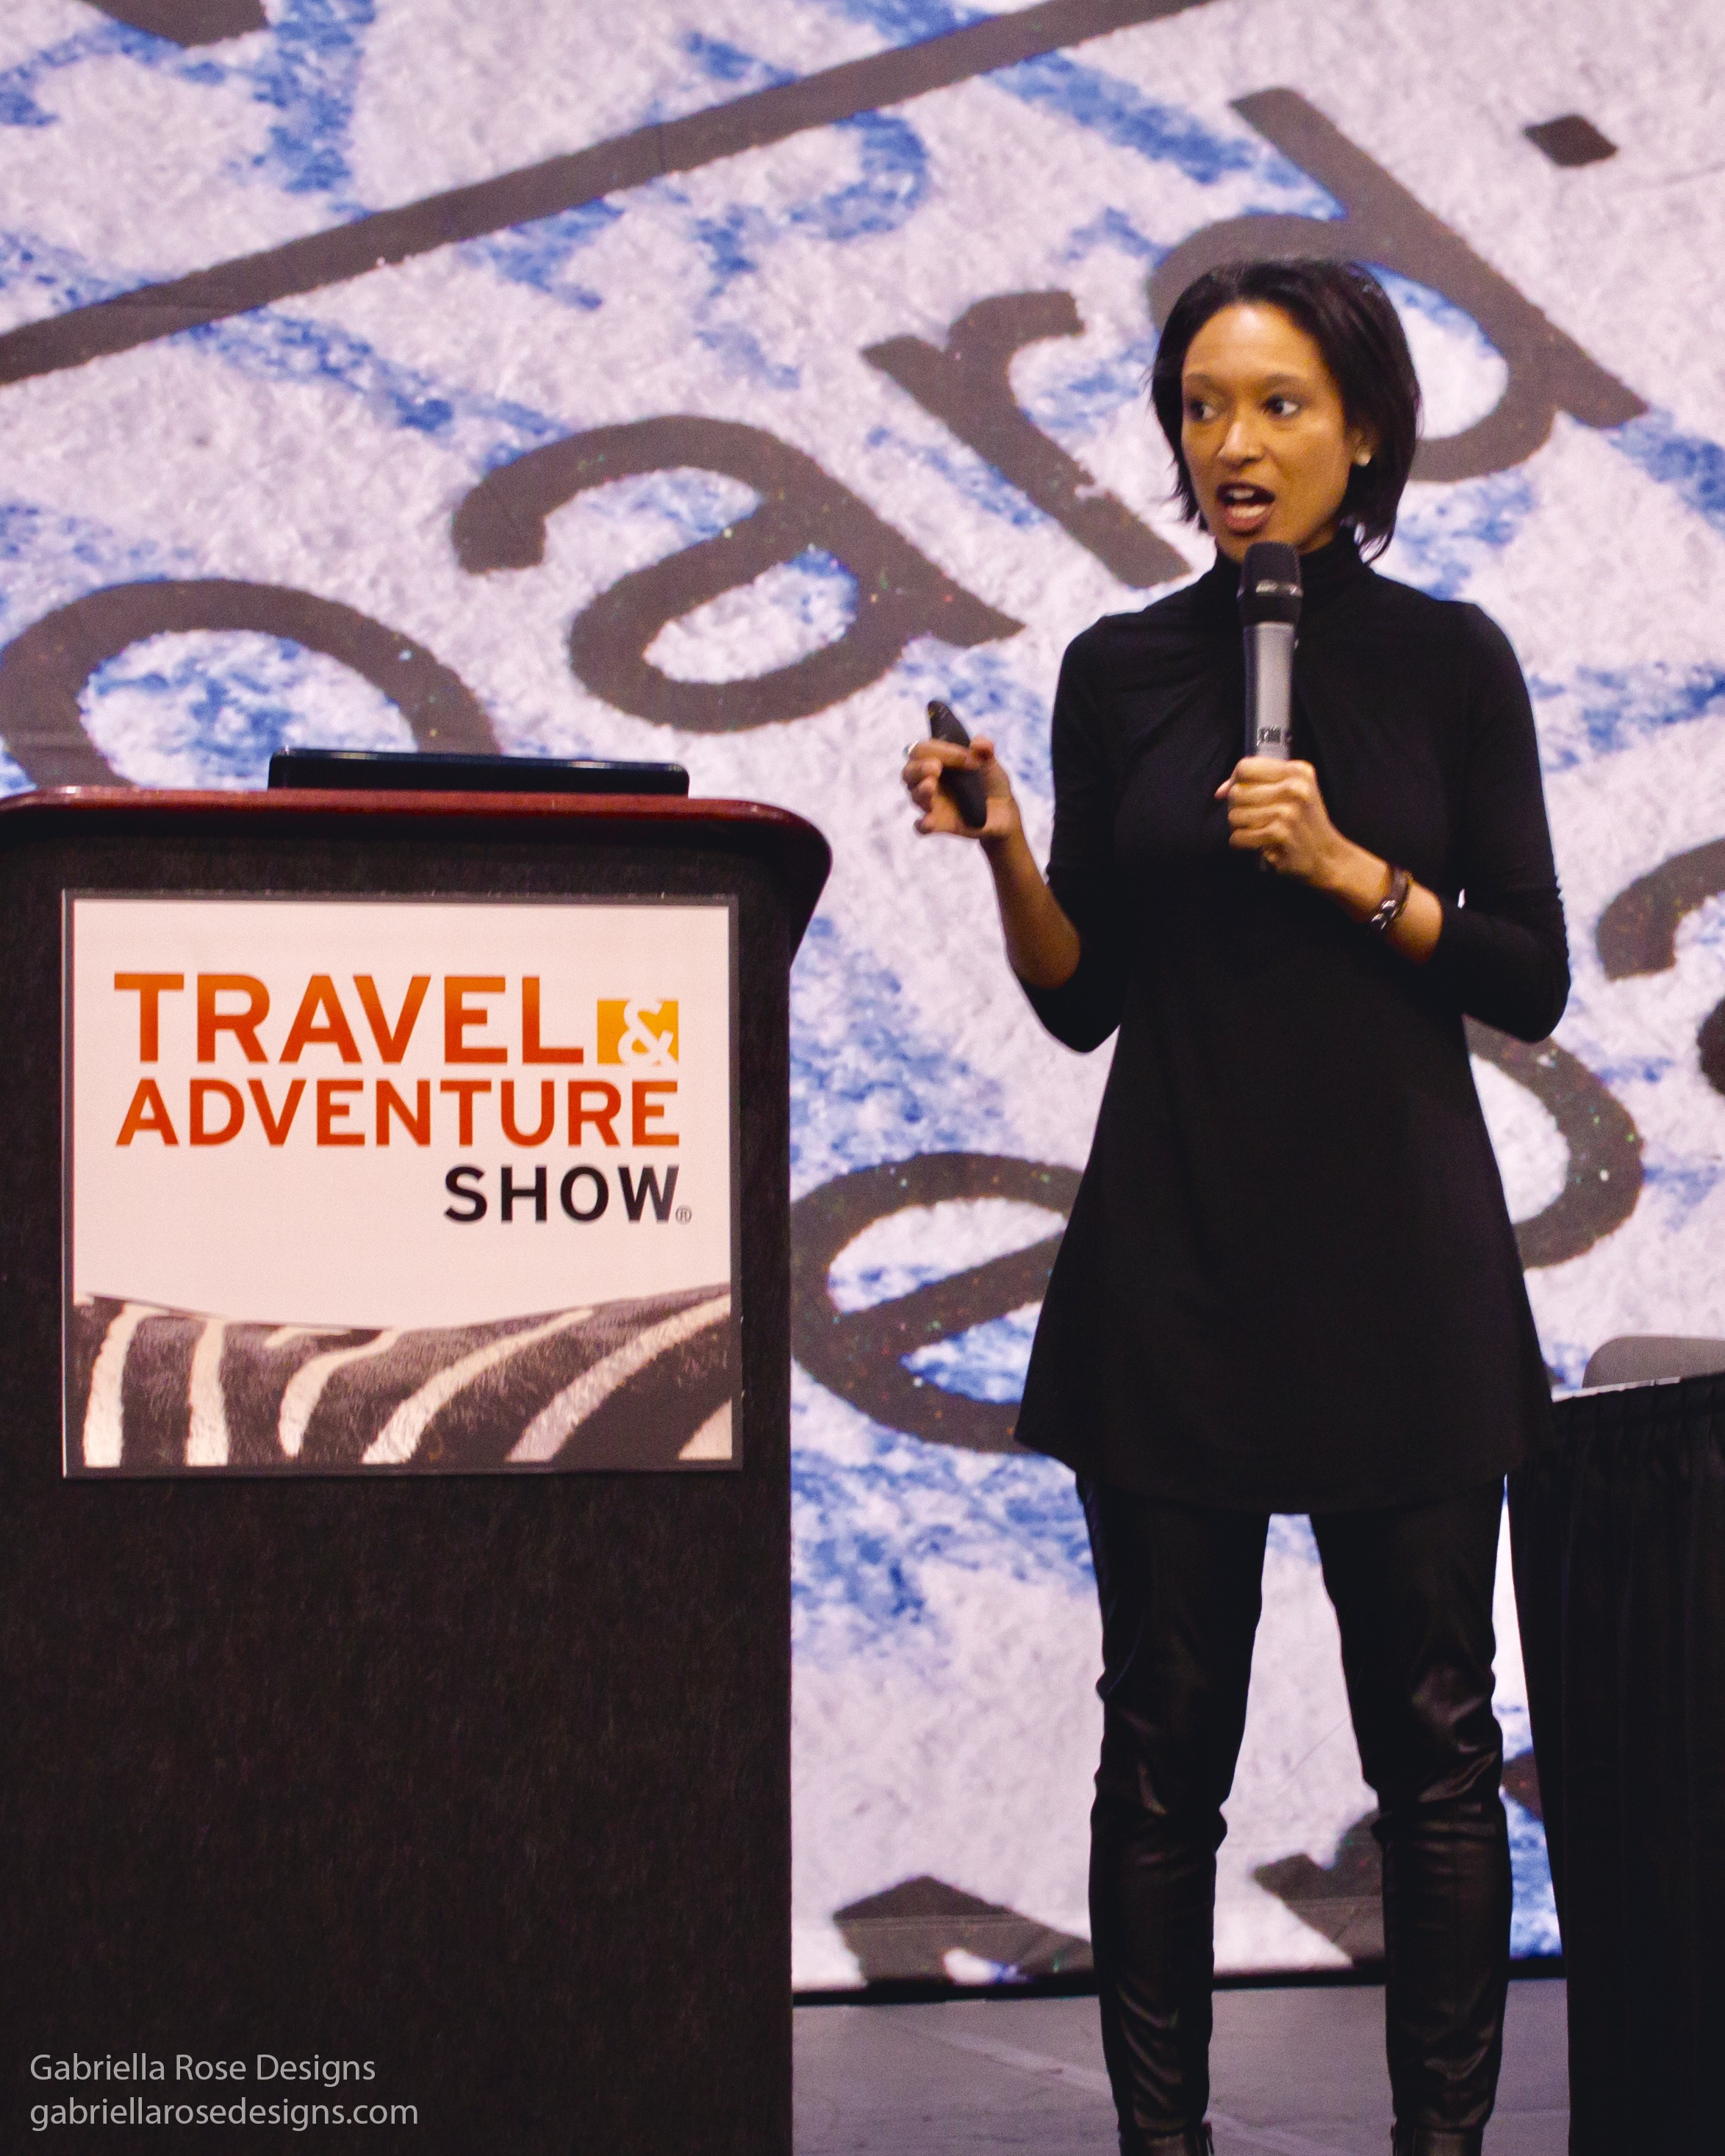 Speaking at the Travel &amp; Adventure Show